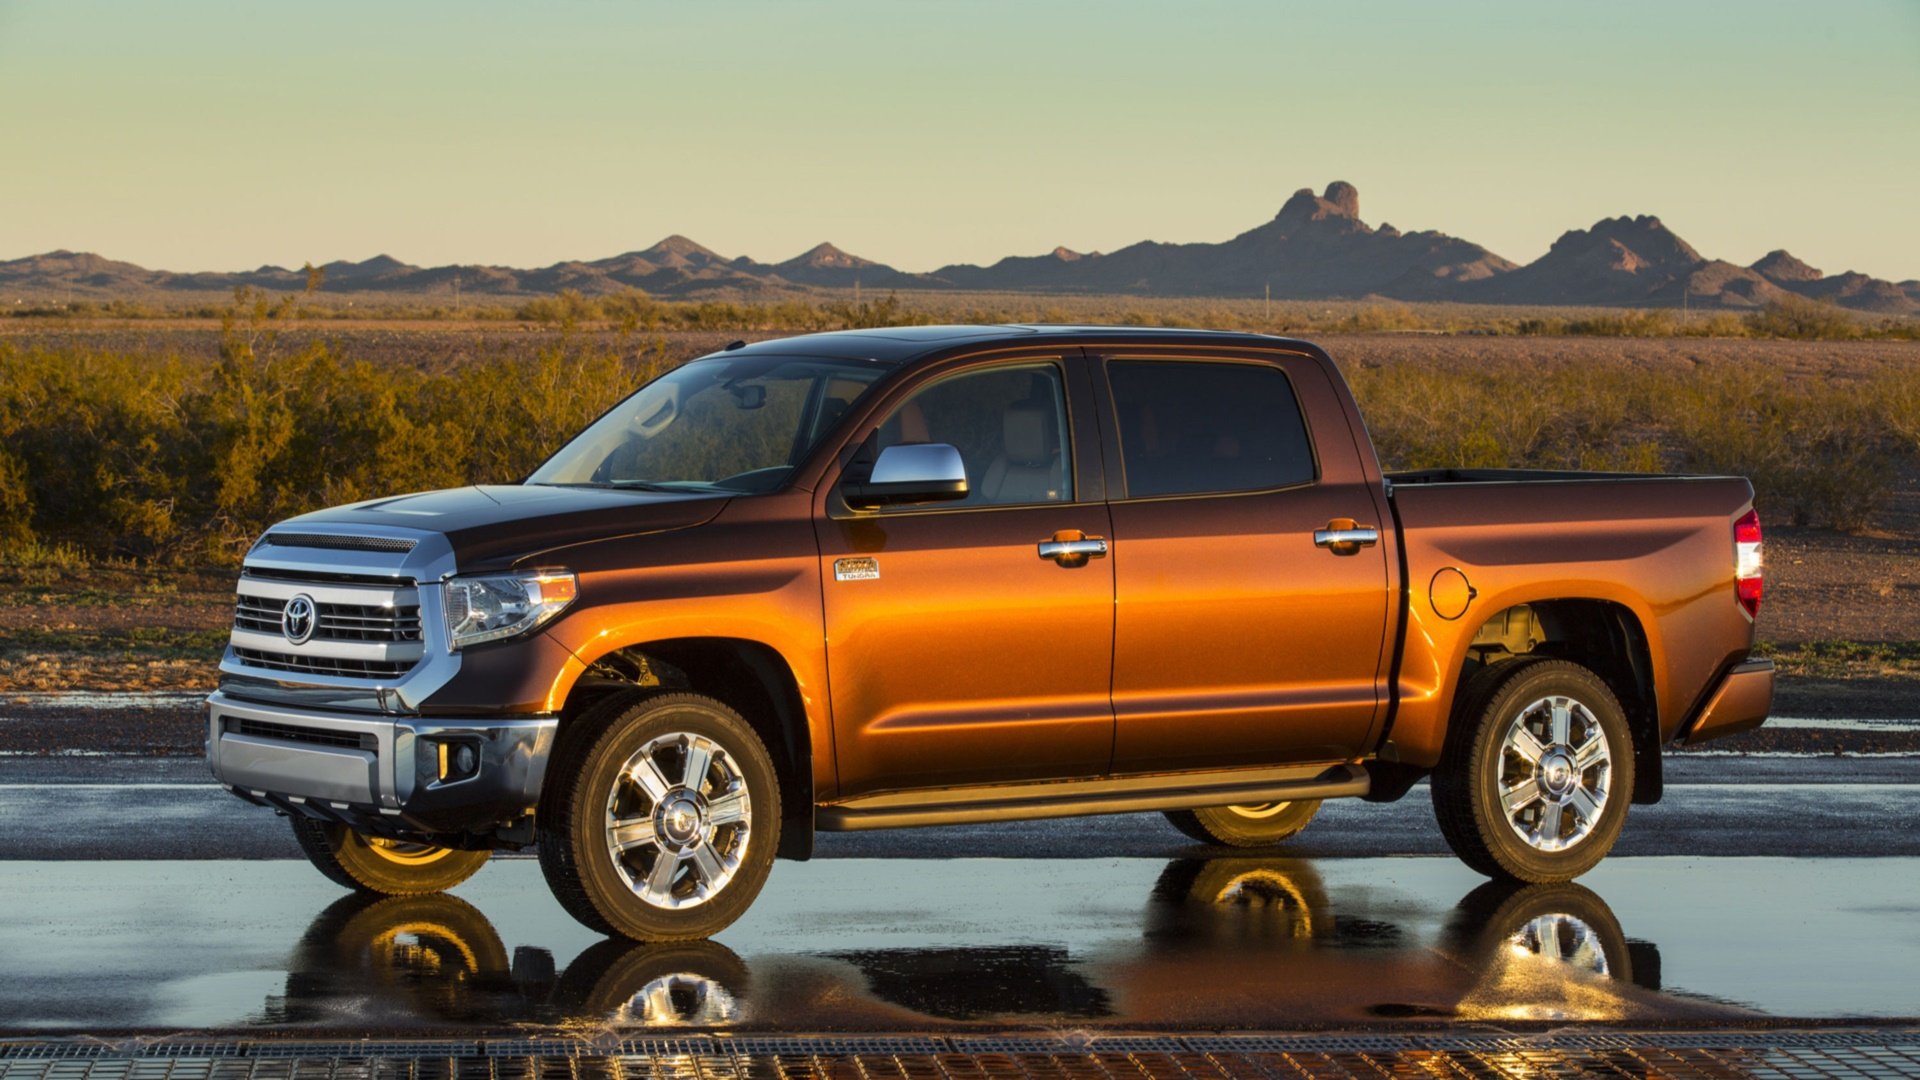 Toyota Tundra Wallpapers Hd For Desktop Backgrounds